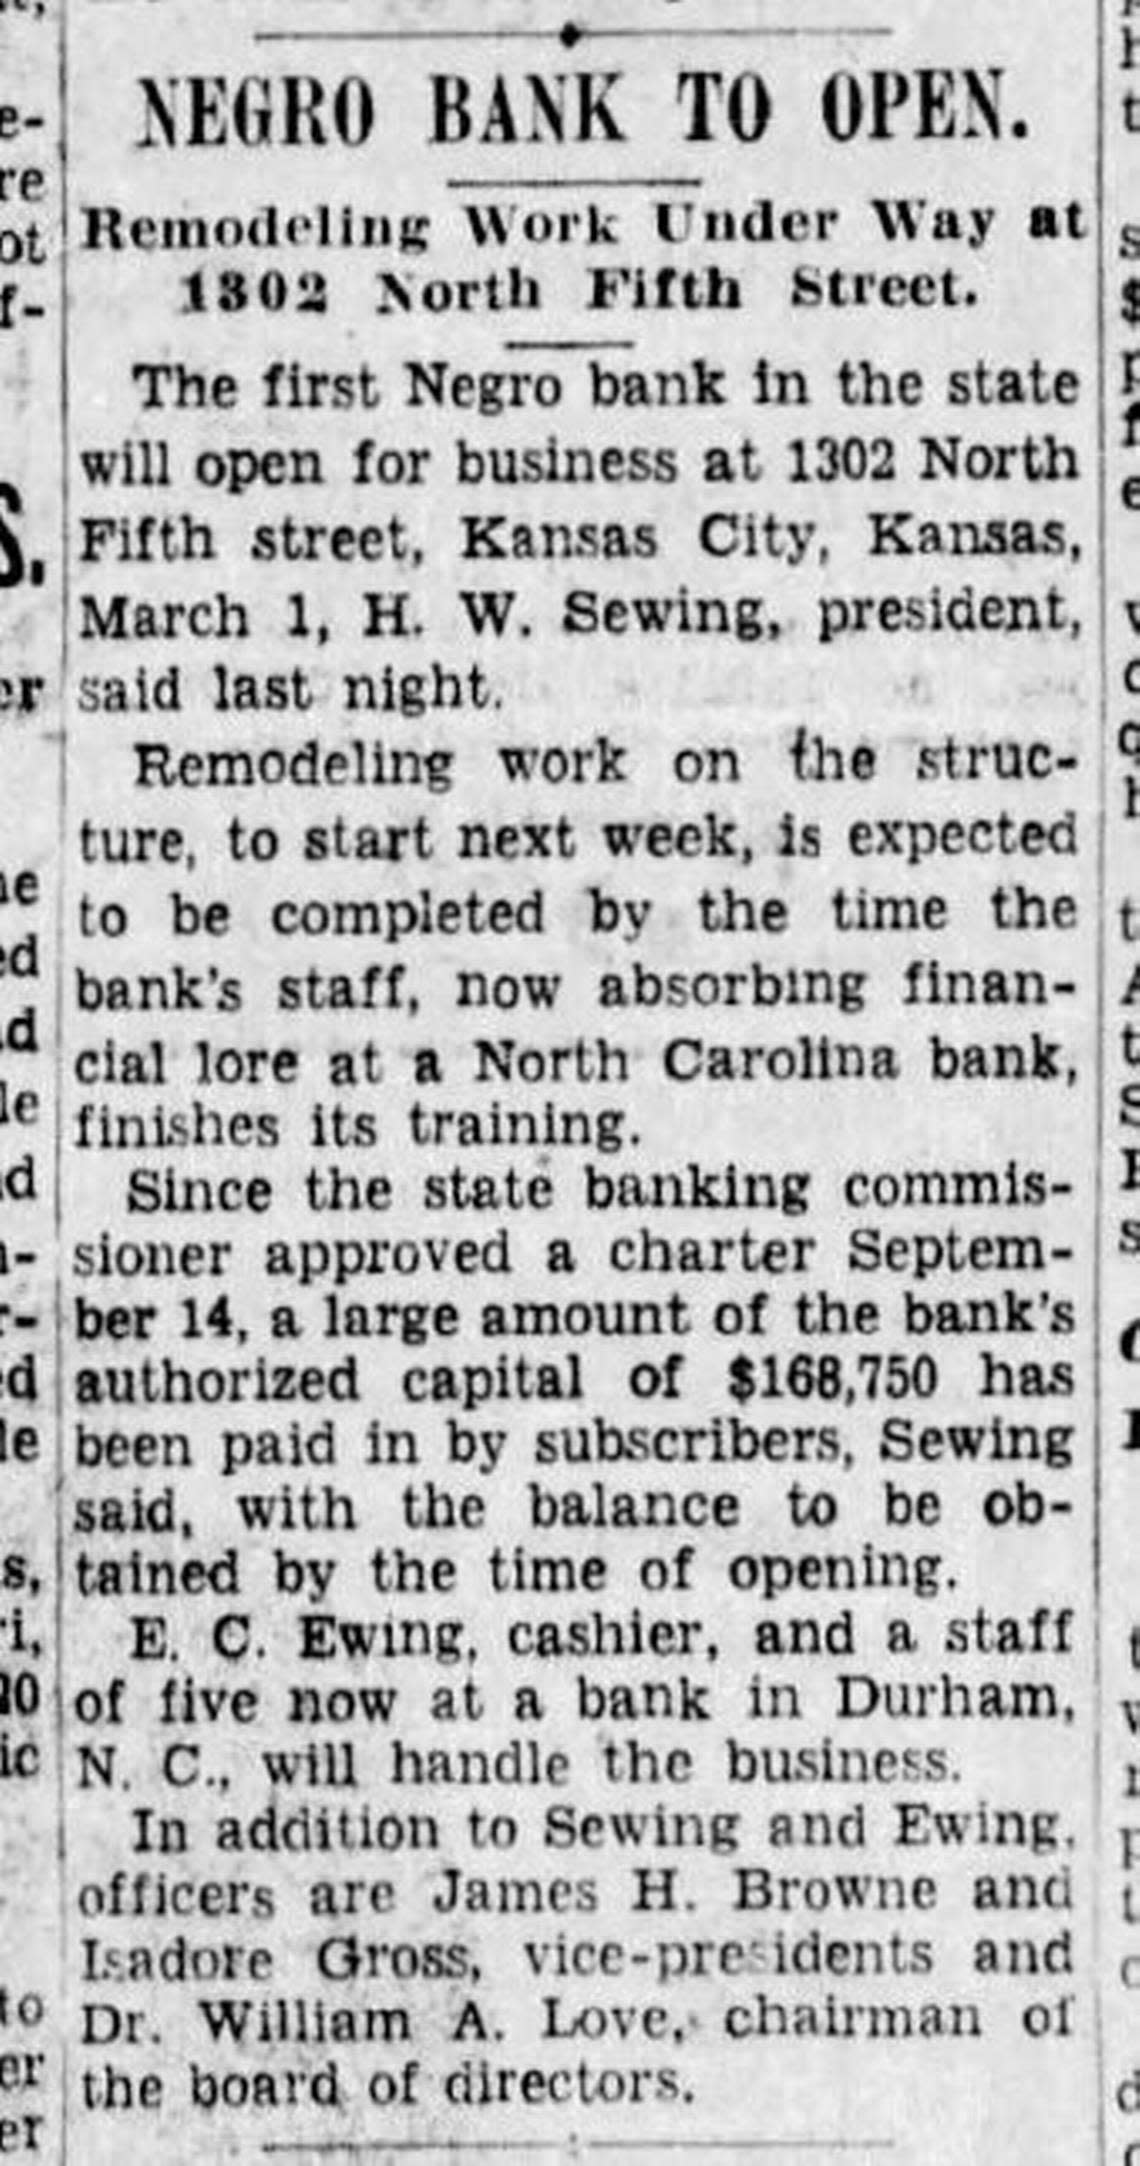 A story in The Kansas CIty Star on Sunday, Dec. 22, 1946, announced the eventual opening of the first Black-owned bank in Kansas, and one of only a few in the United States.